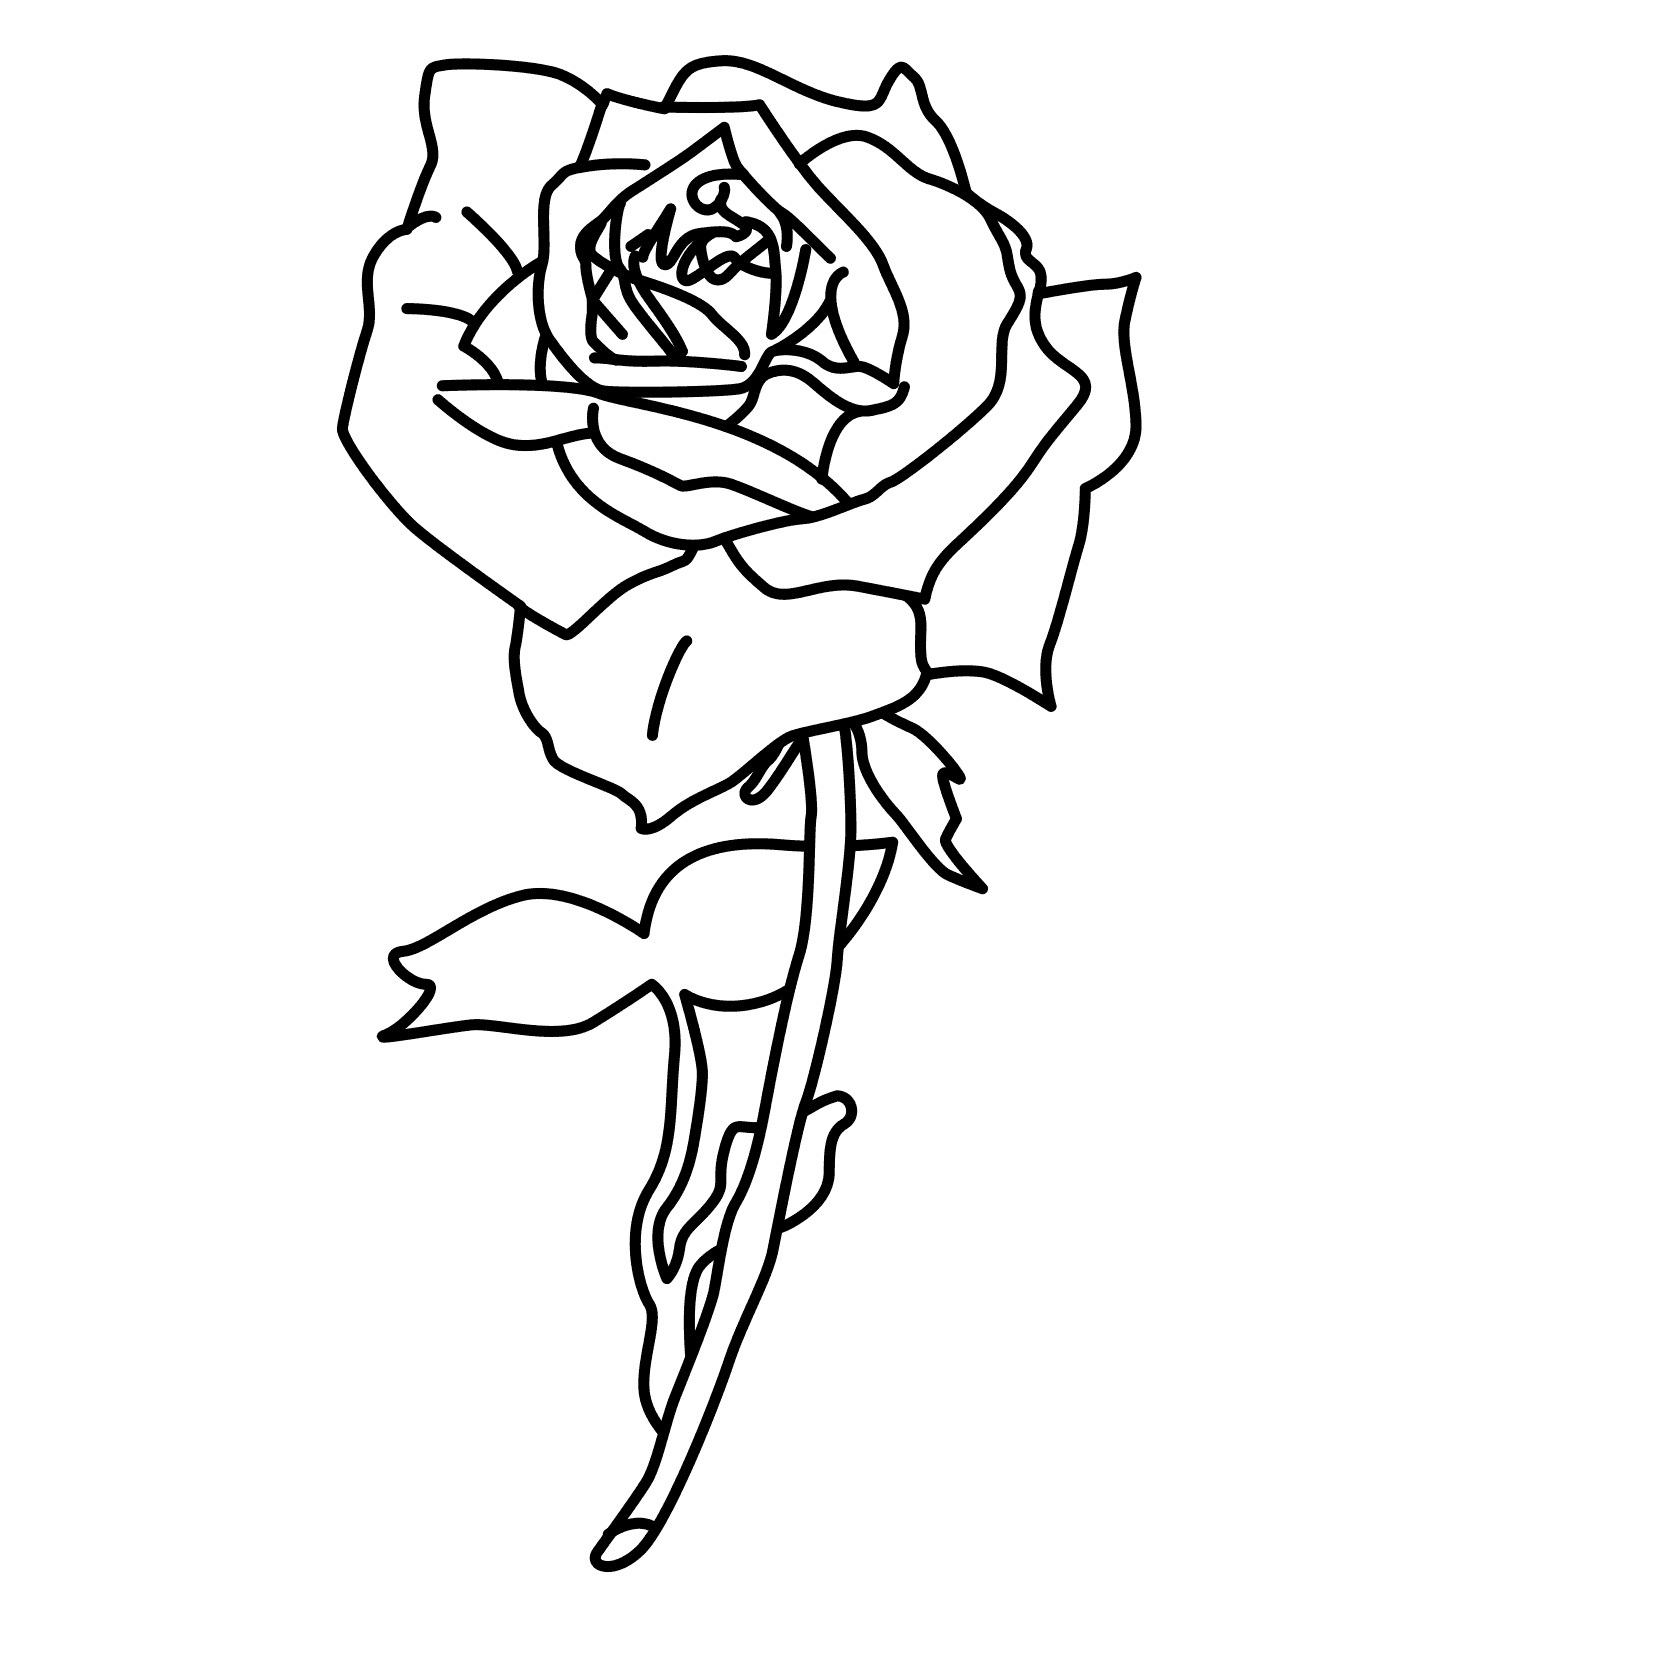 Download Free Printable Roses Coloring Pages For Kids